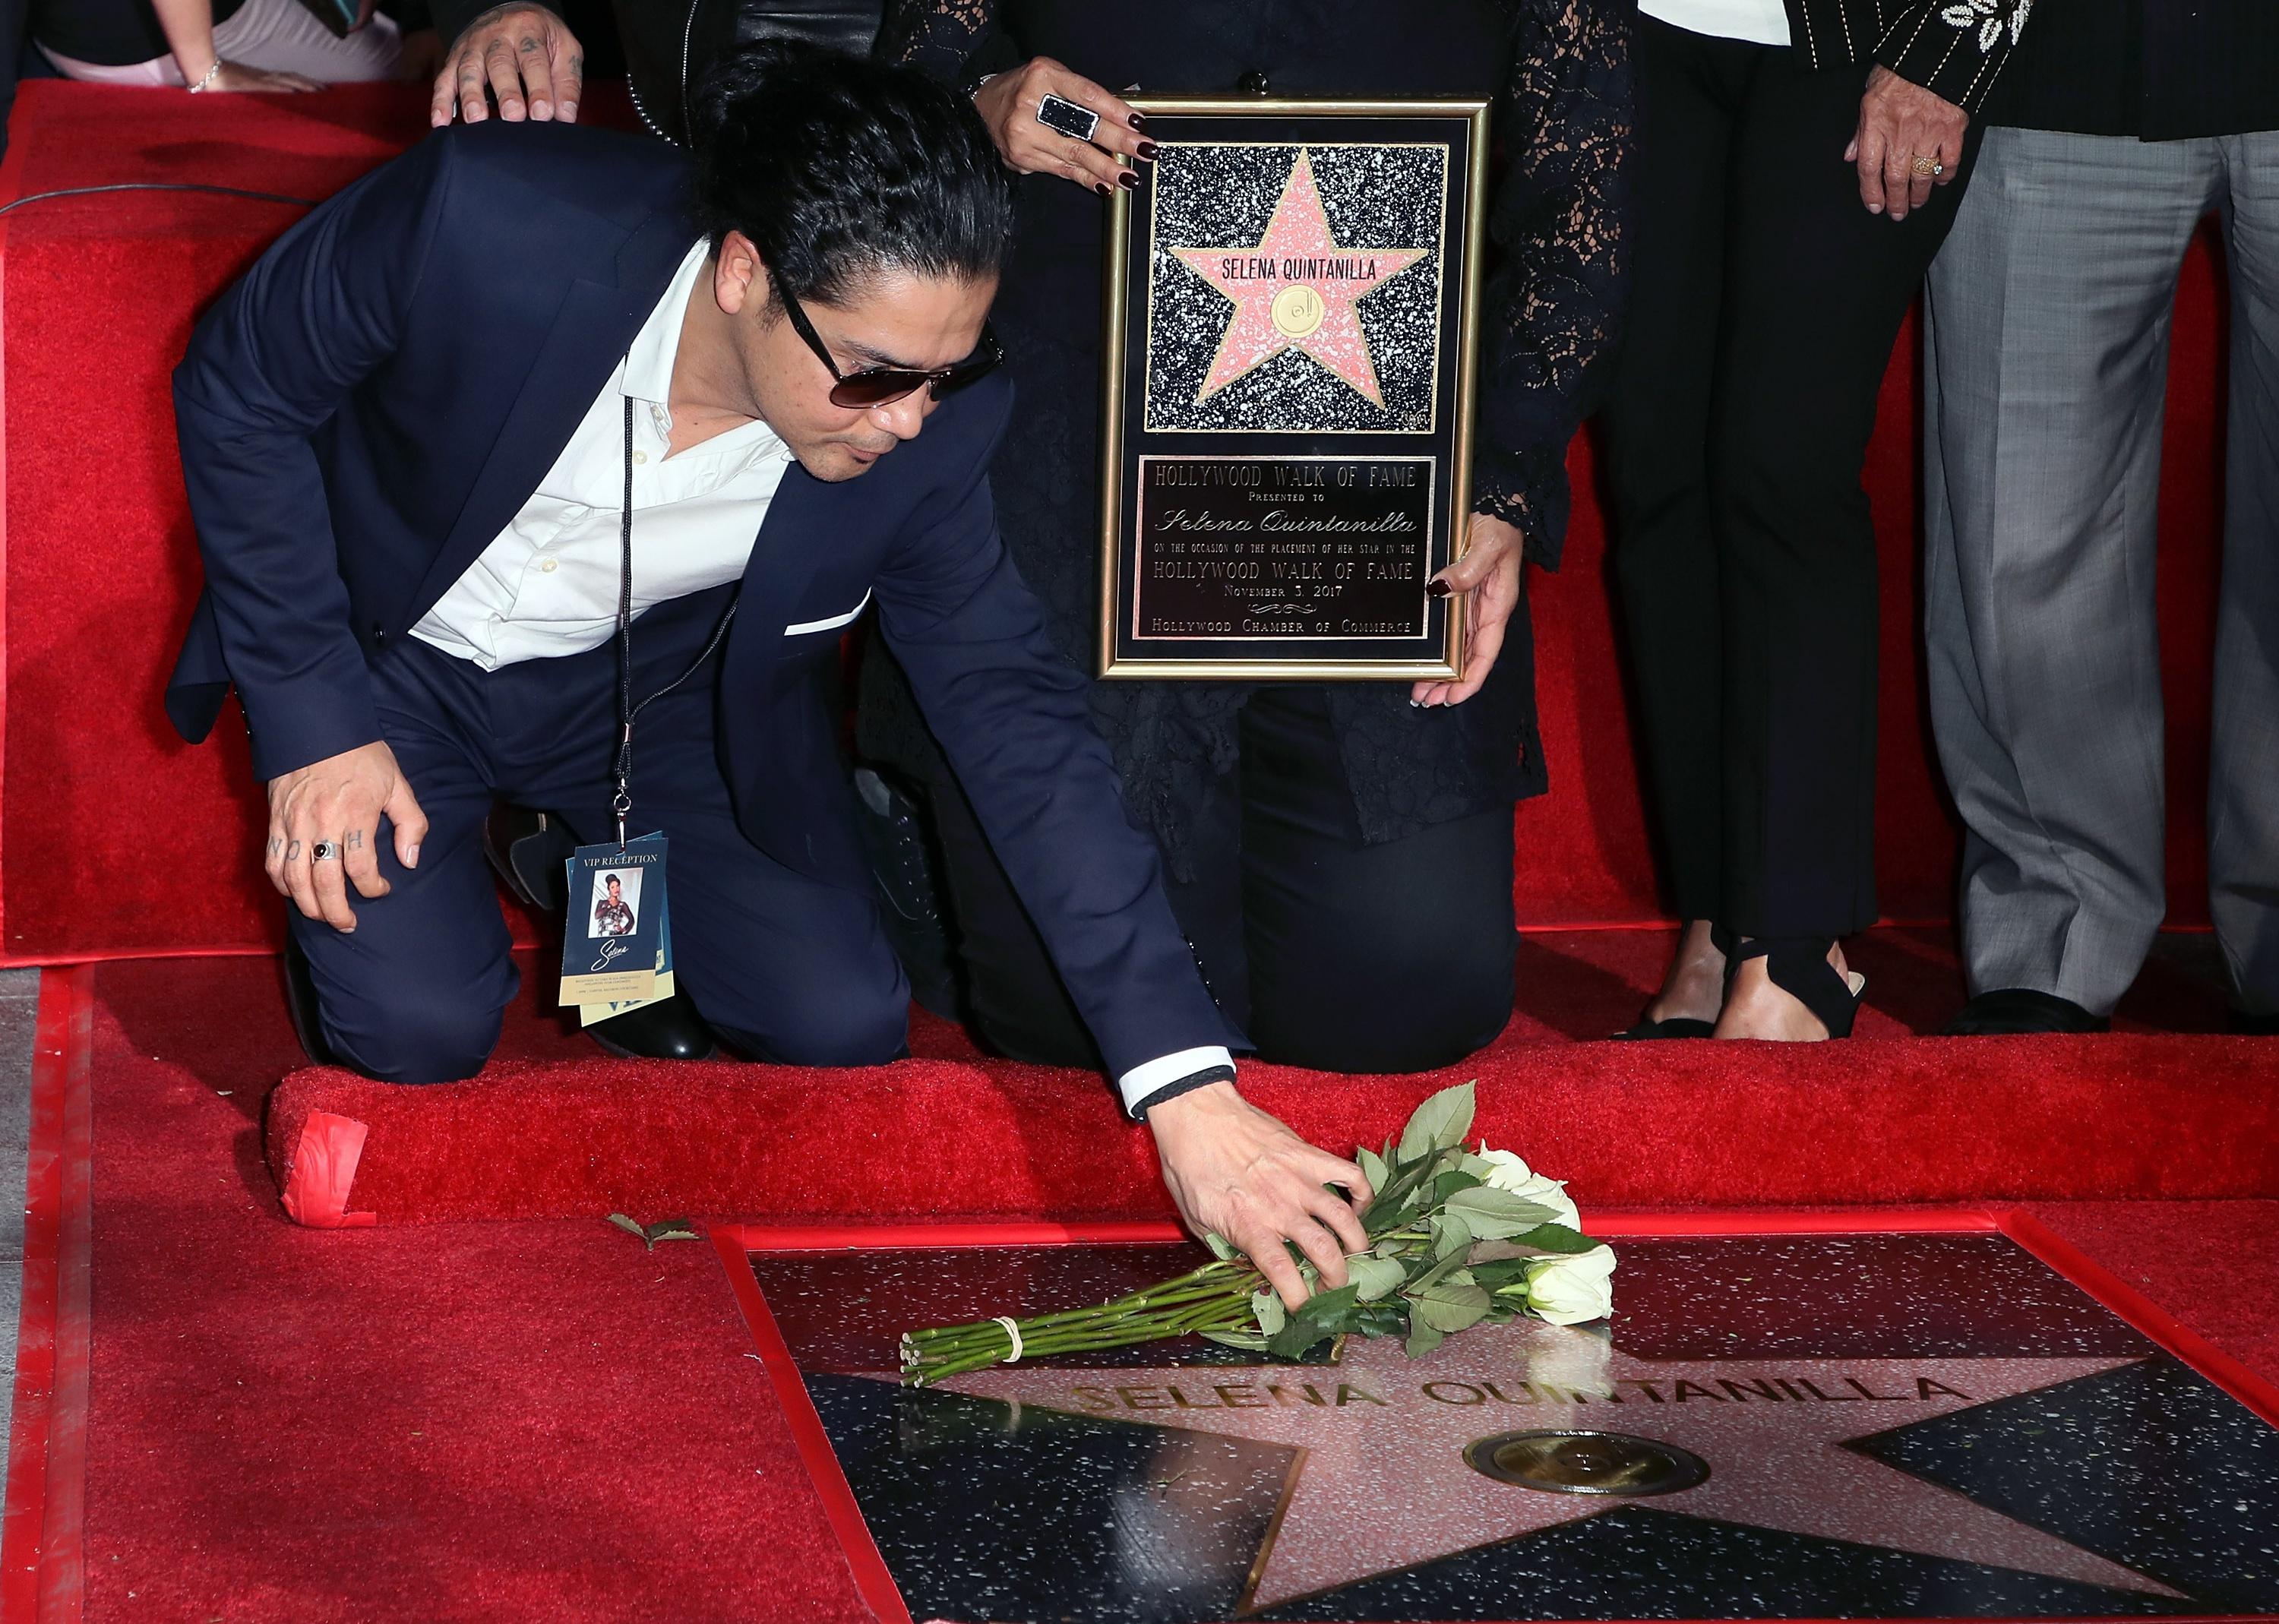 Chris Perez attends singer Selena Quintanilla being honored posthumously with a Star on the Hollywood Walk of Fame.